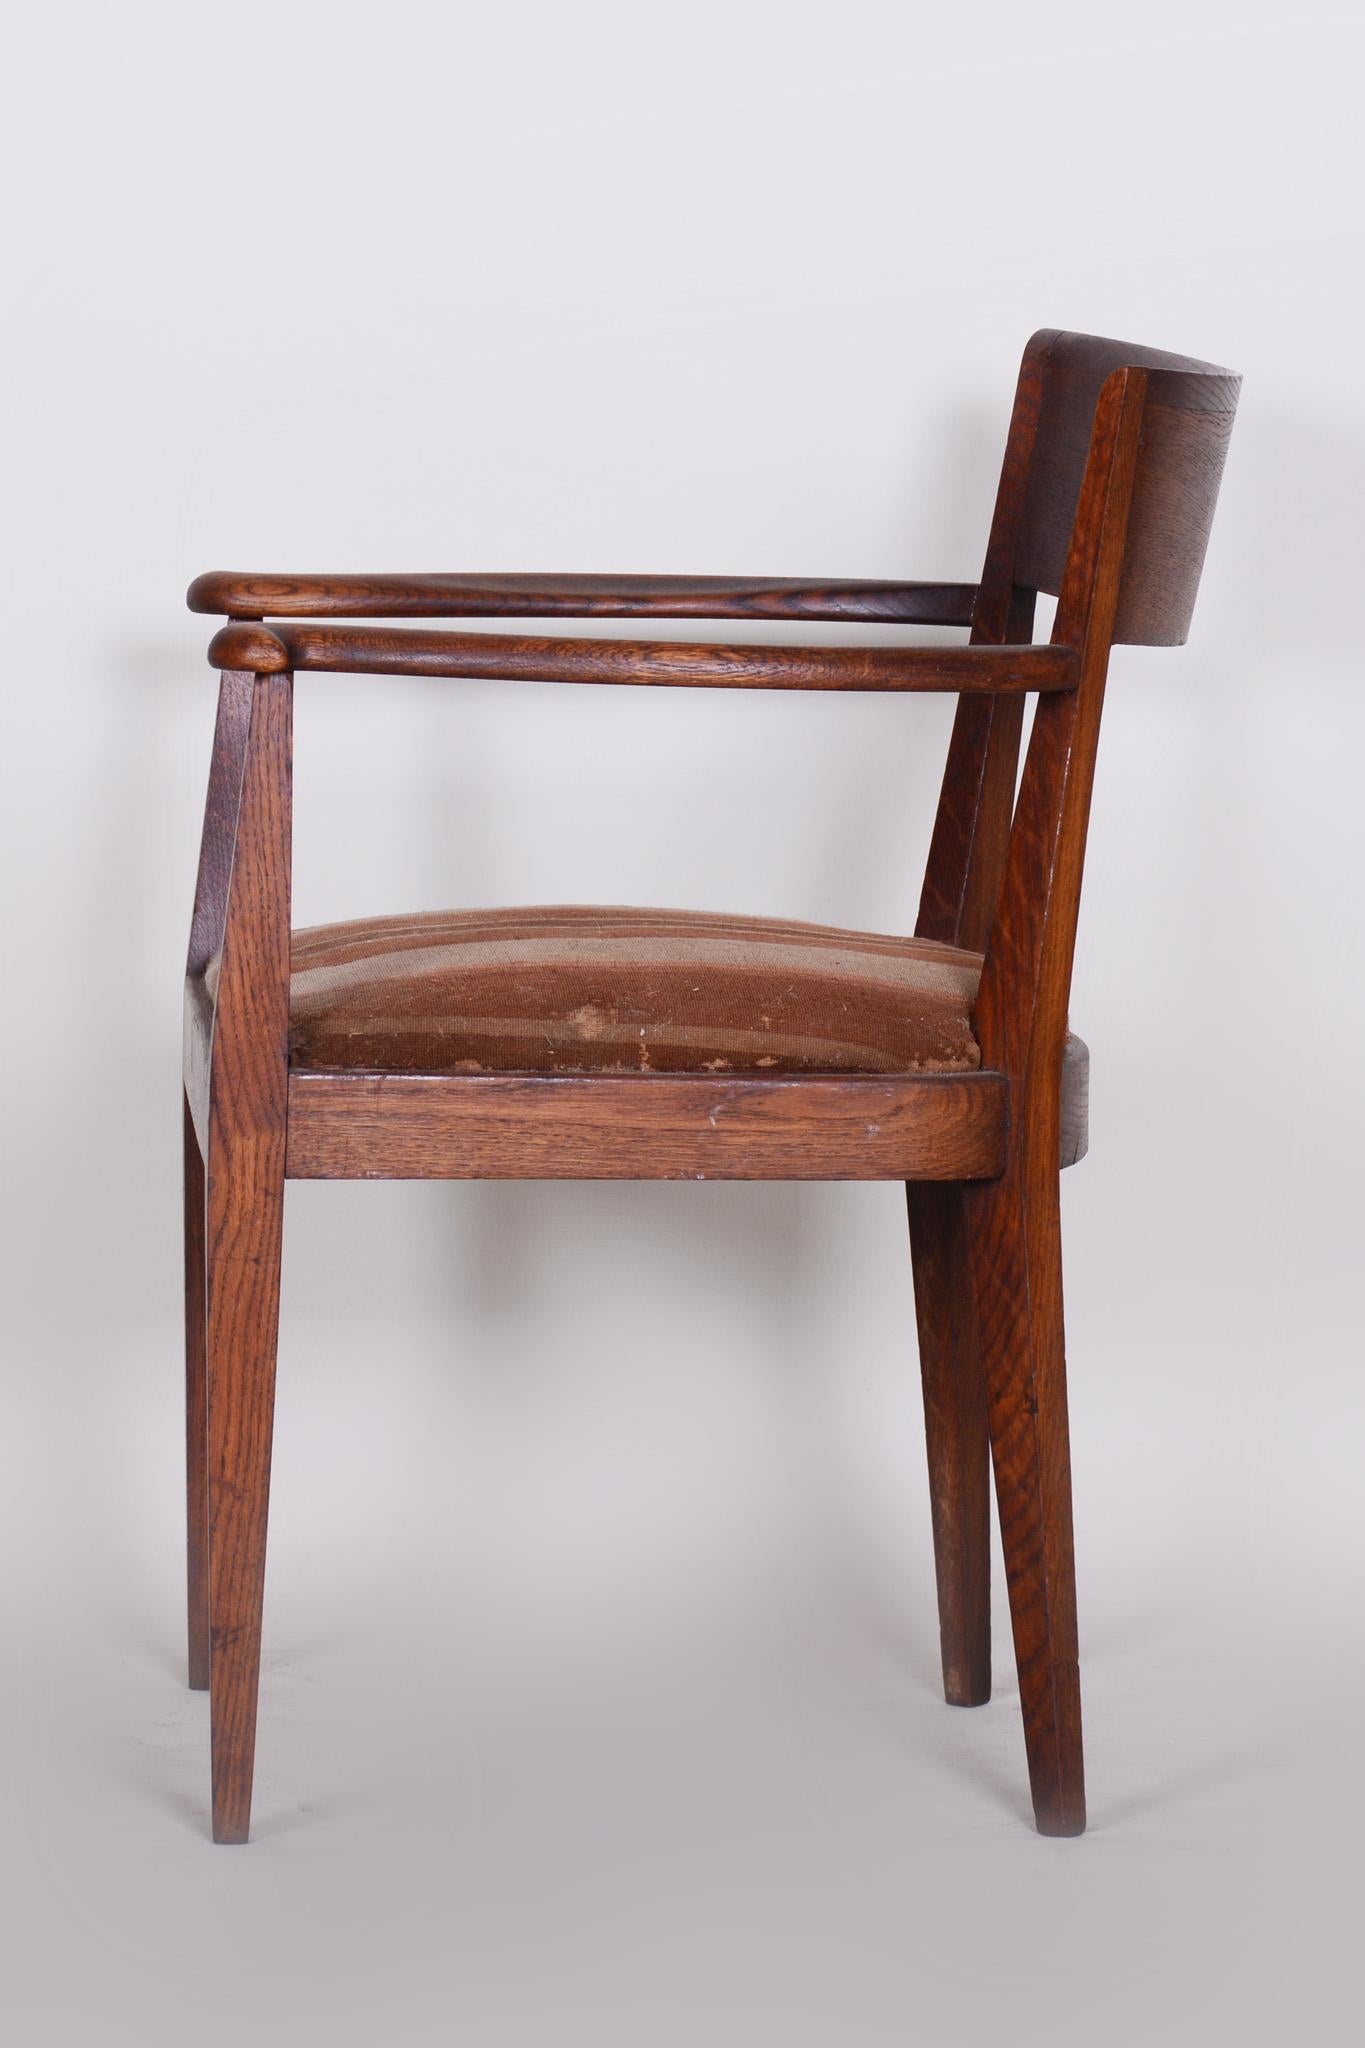 Original very well preserved condition.

Art Deco armchair
Material: Oak
Source: Czechia
Period: 1920-1929.